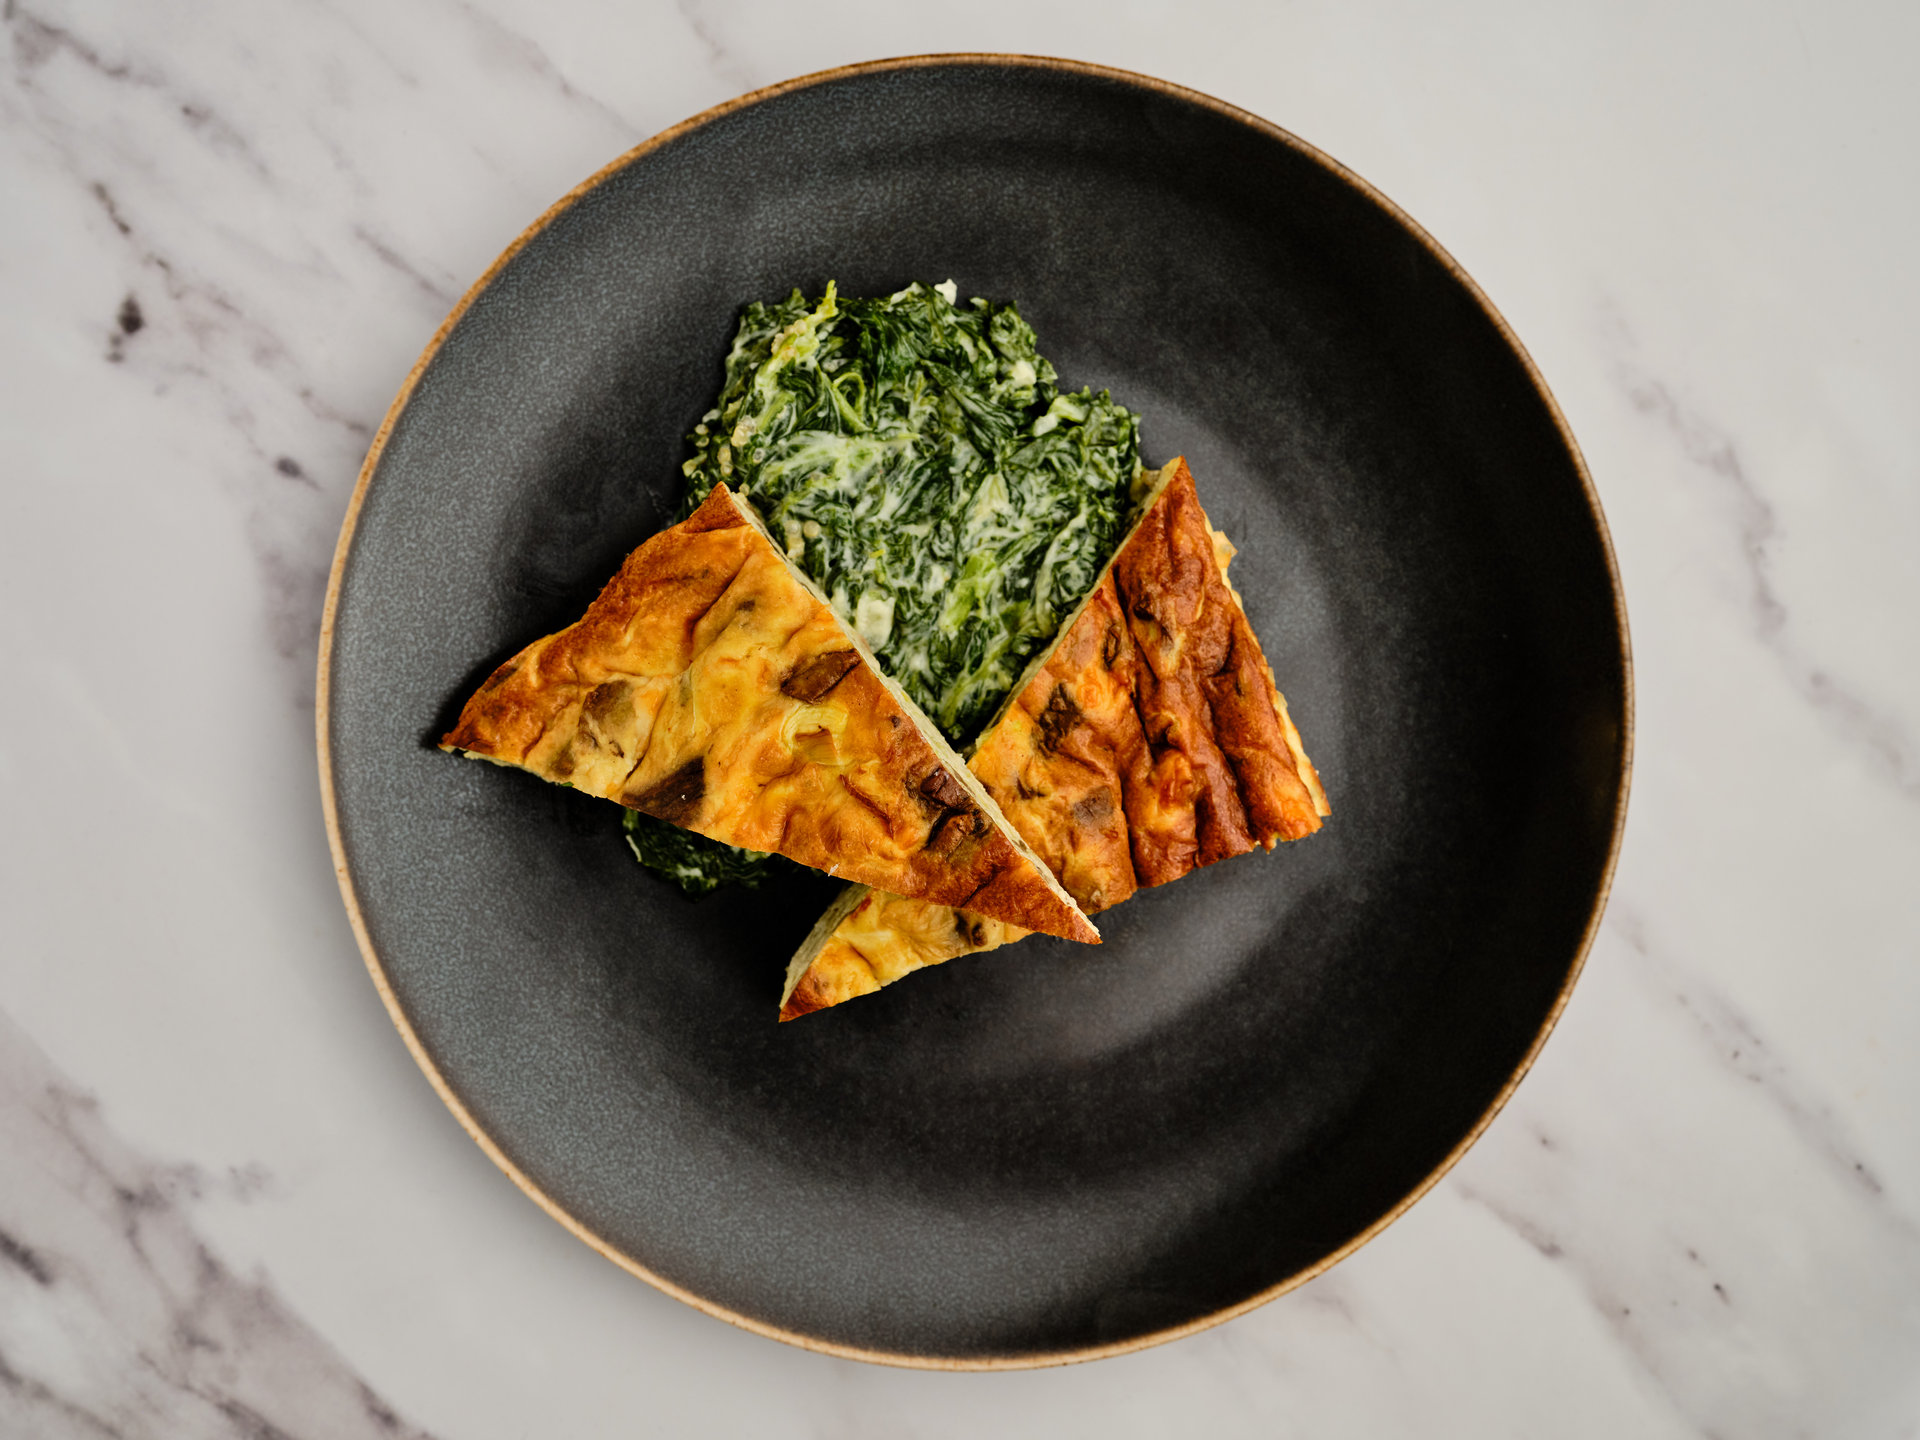 Omelette triangles with spinach on a black plate